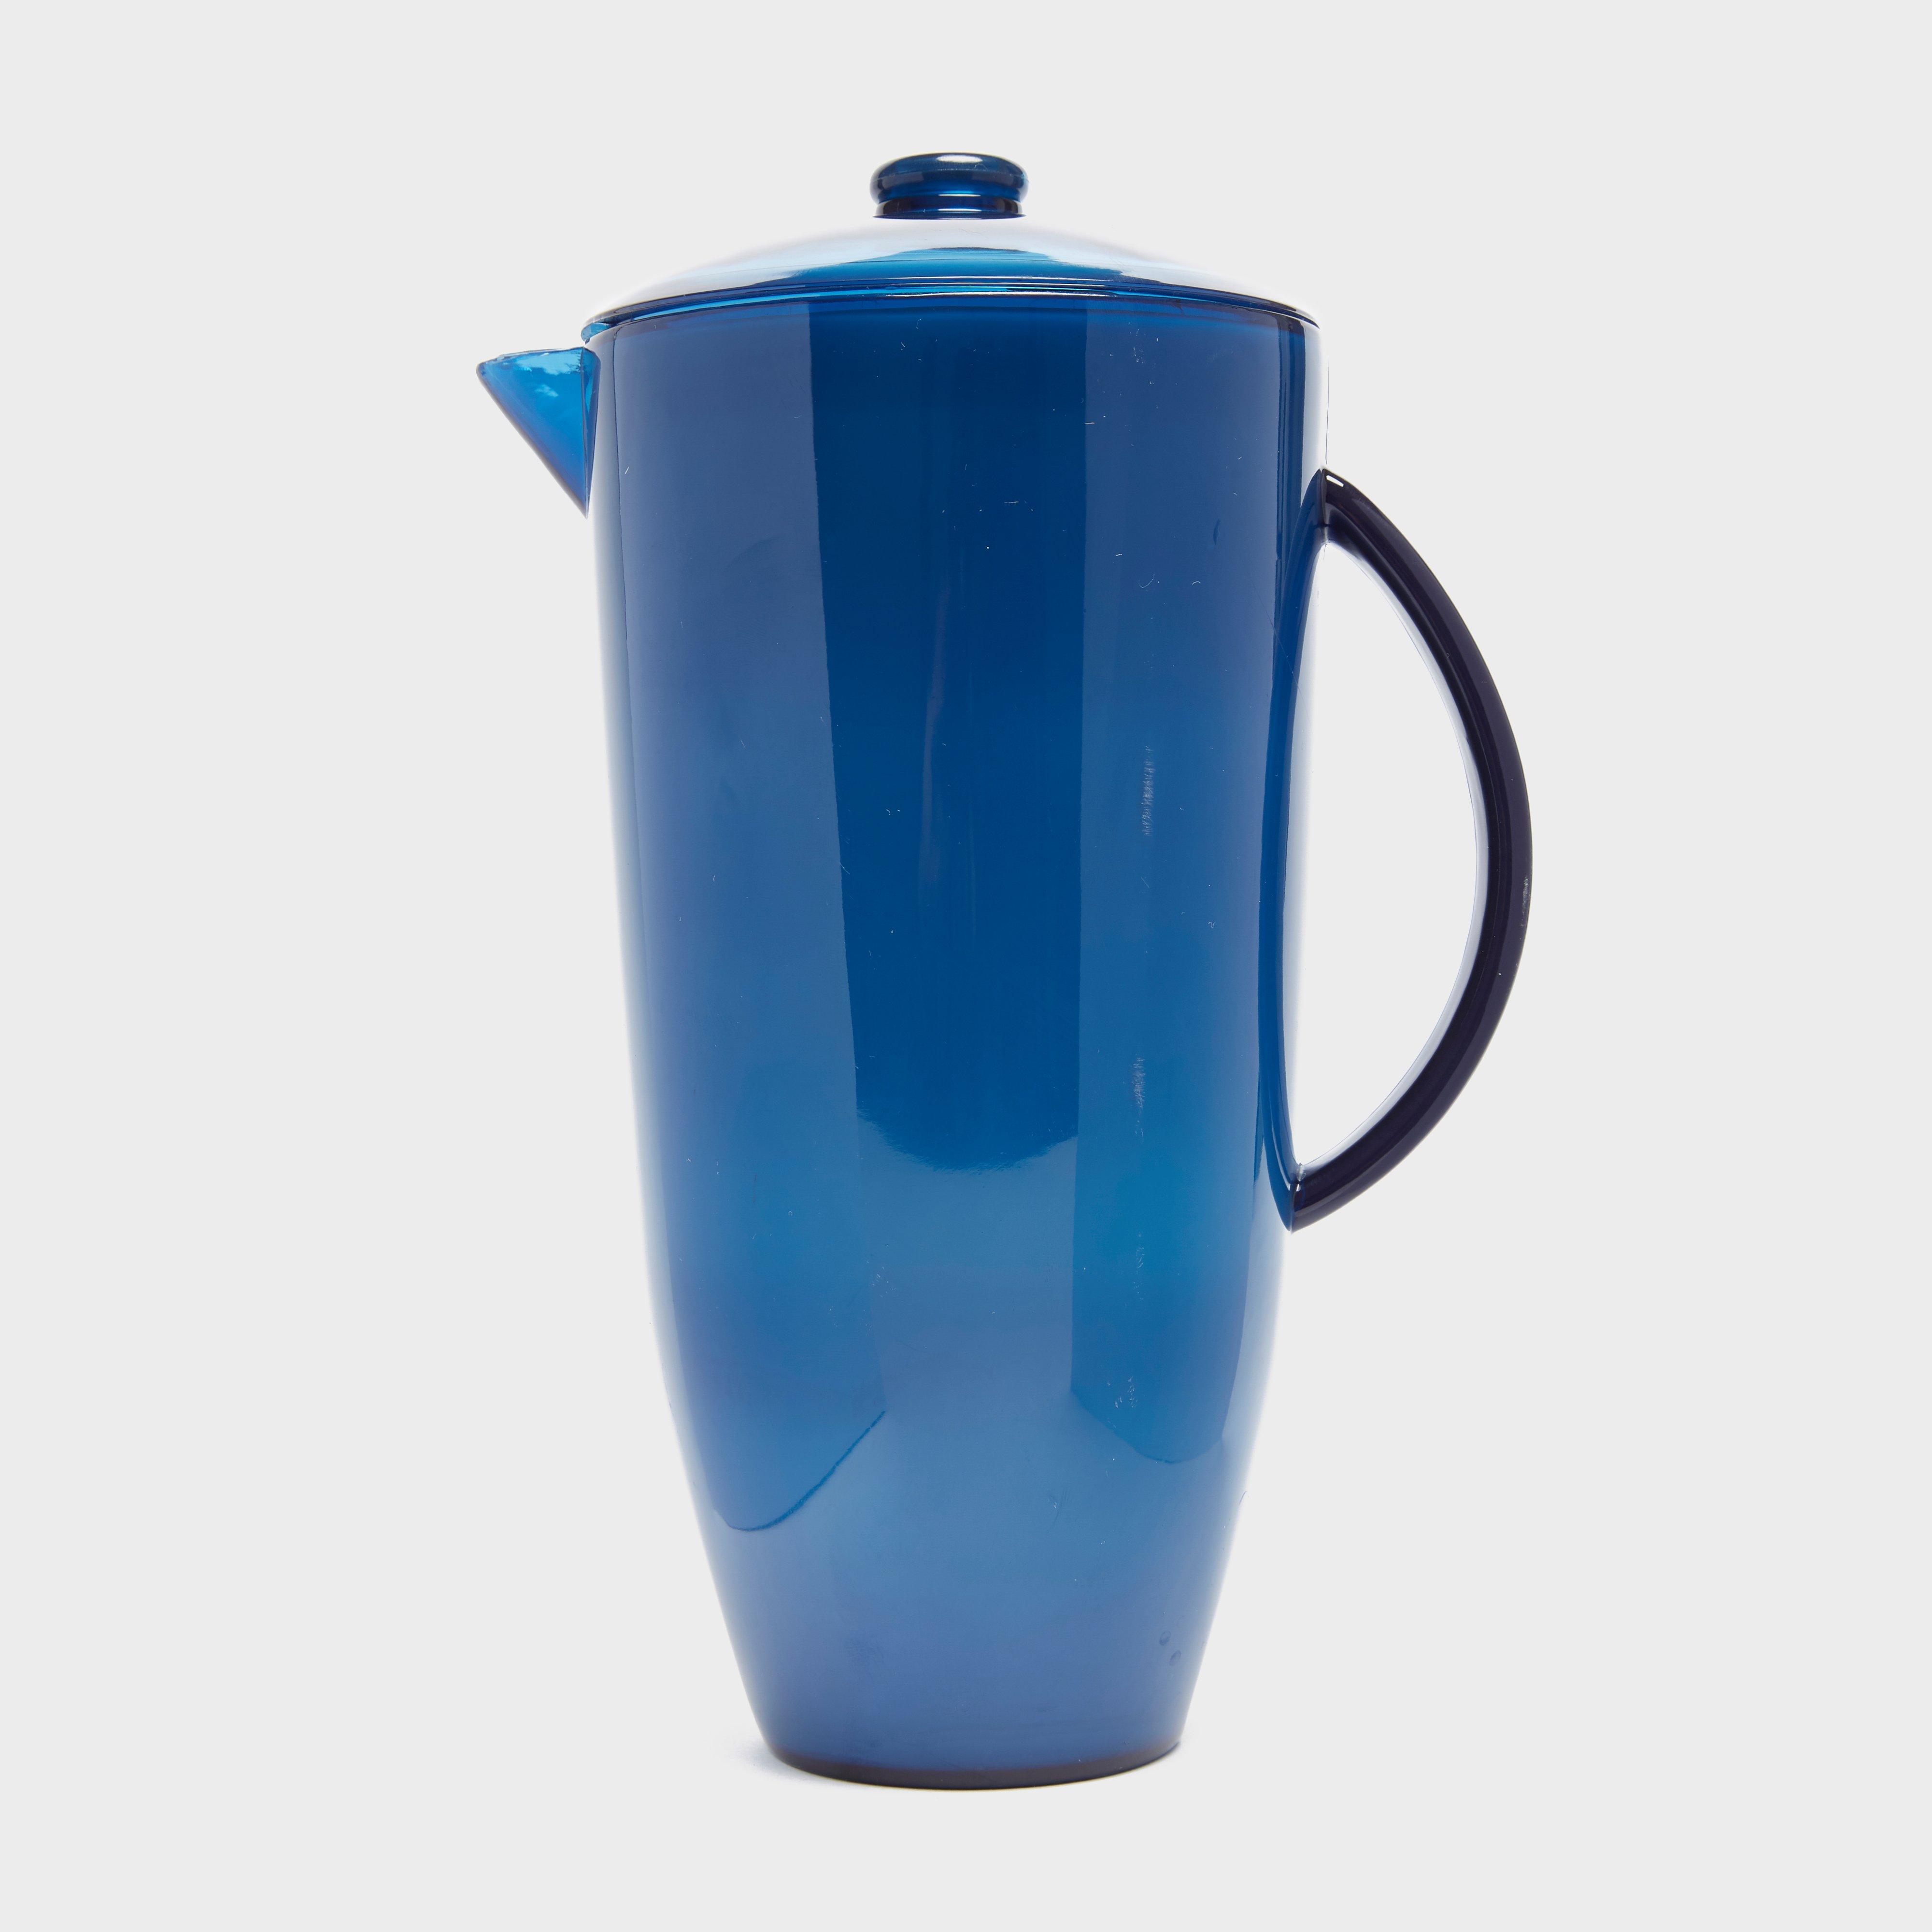 Photos - Other Camping Utensils Hi-Gear Deluxe Plastic Pitcher, Blue 